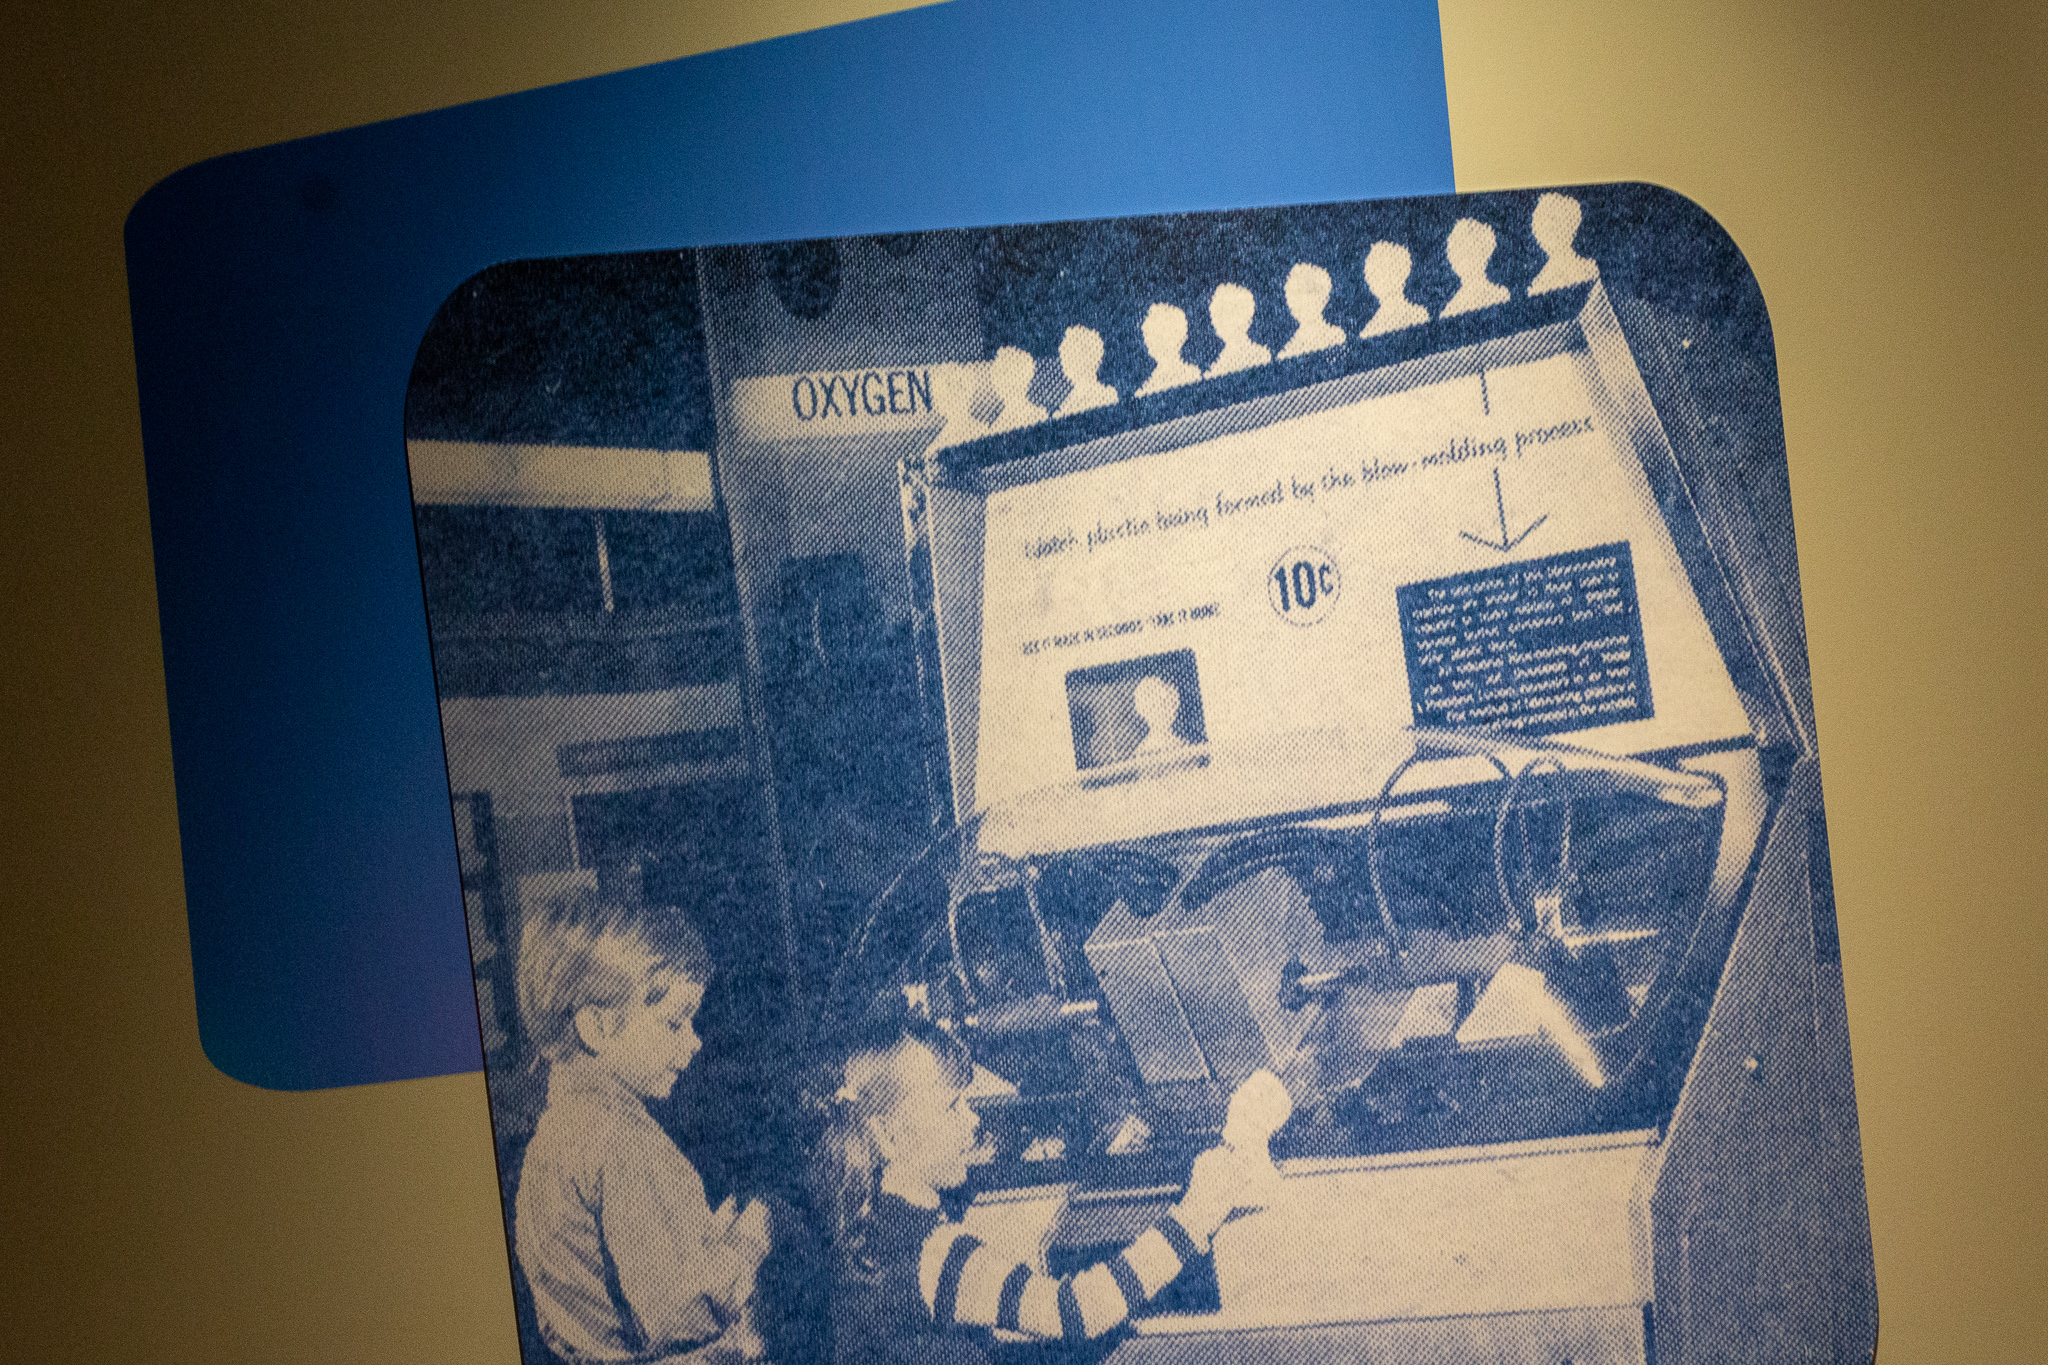 A large photo of a children using a Mold-A-Rama machine in the 1960s mounted on a grey wall